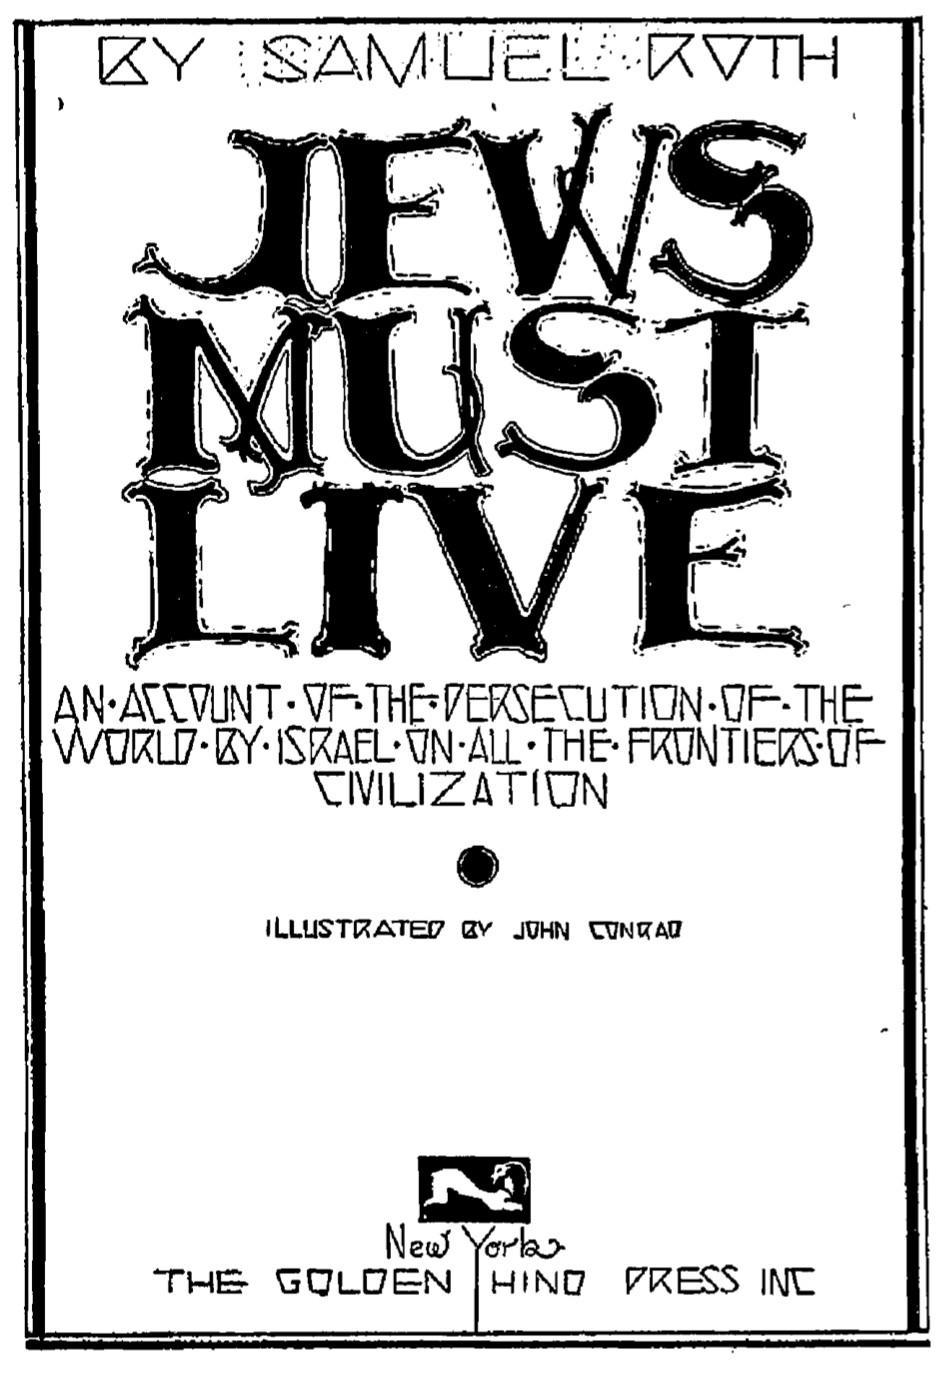 Jews must live; an account of the persecution of the world by Israel on all the frontiers of civilization (1934) by Roth, Samuel, 1893-1974.